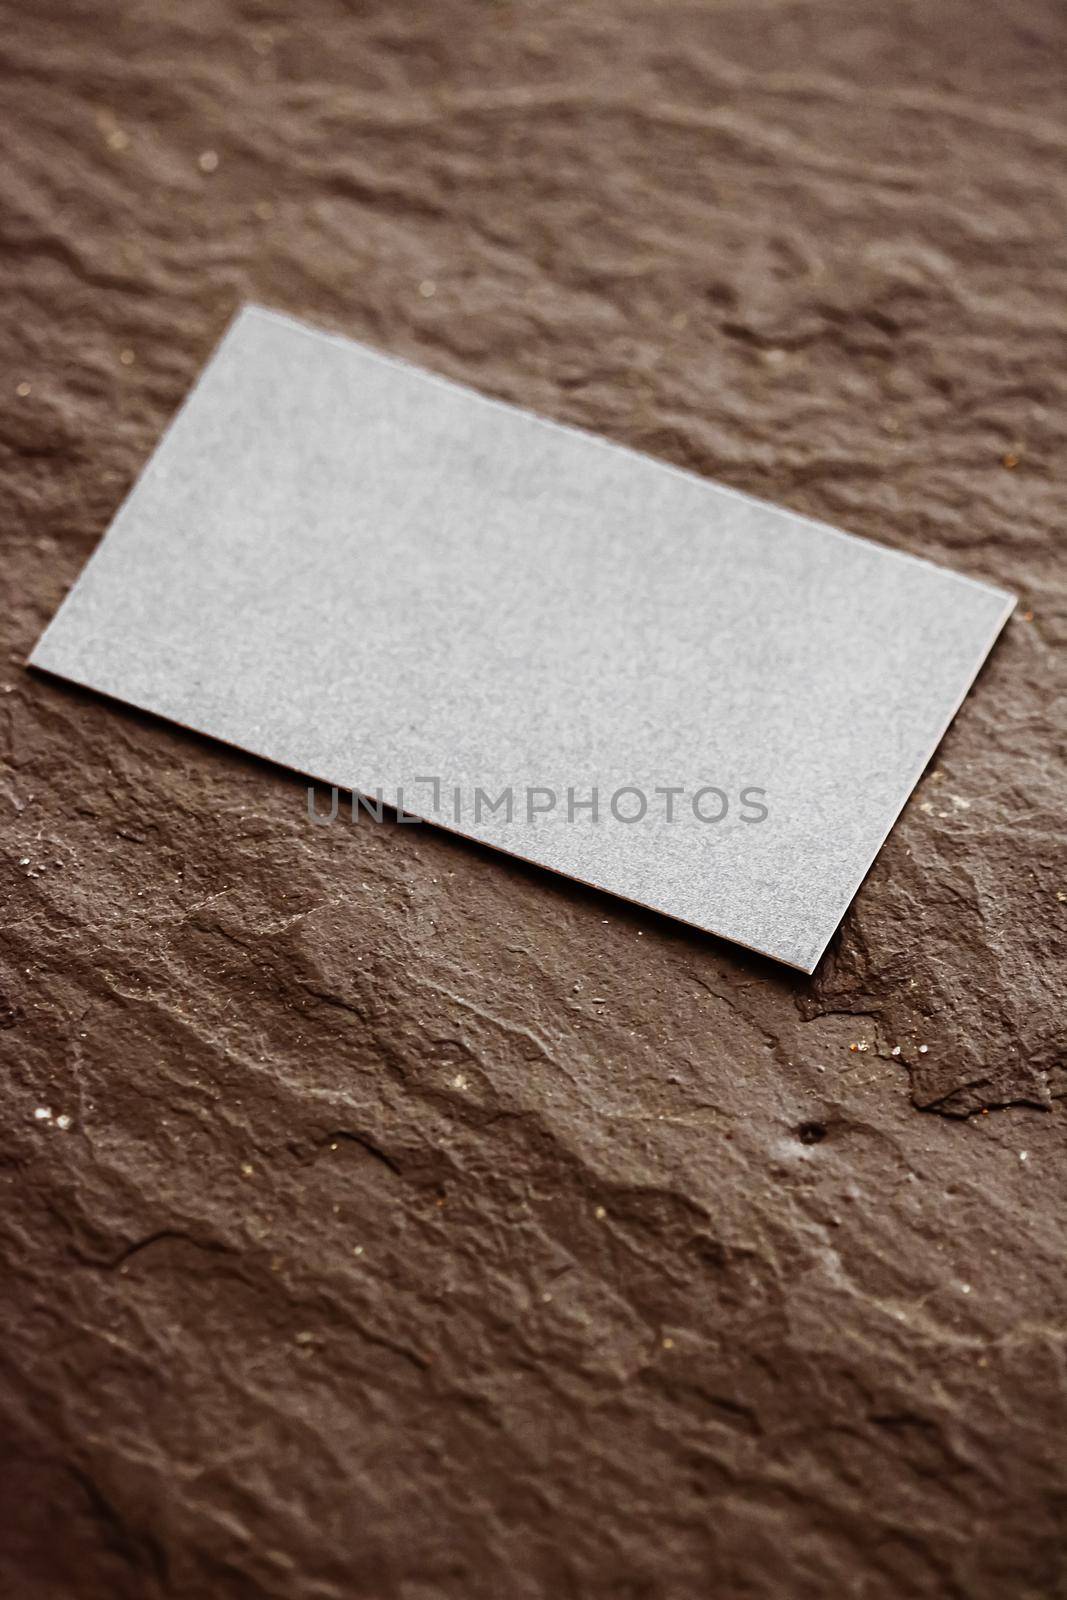 White business card flatlay on brown stone background, luxury branding flat lay and brand identity design for mockups